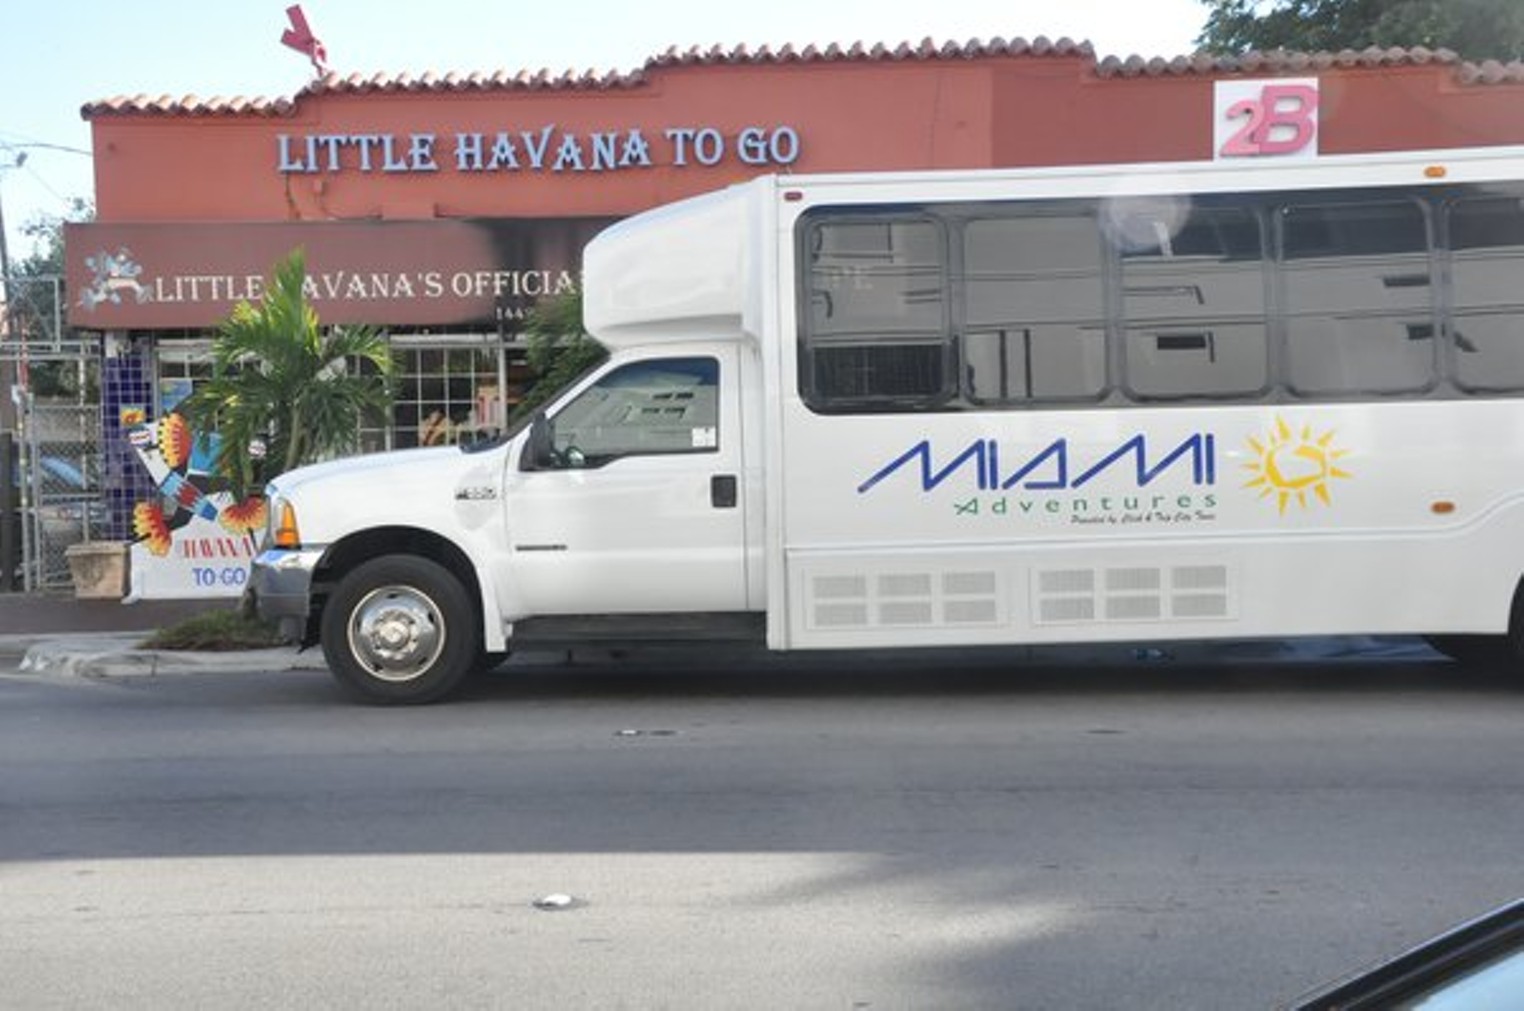 Best Tourist Trap 2007 Little Havana To Go Best Restaurants, Bars, Clubs, Music and Stores in Miami Miami New Times pic